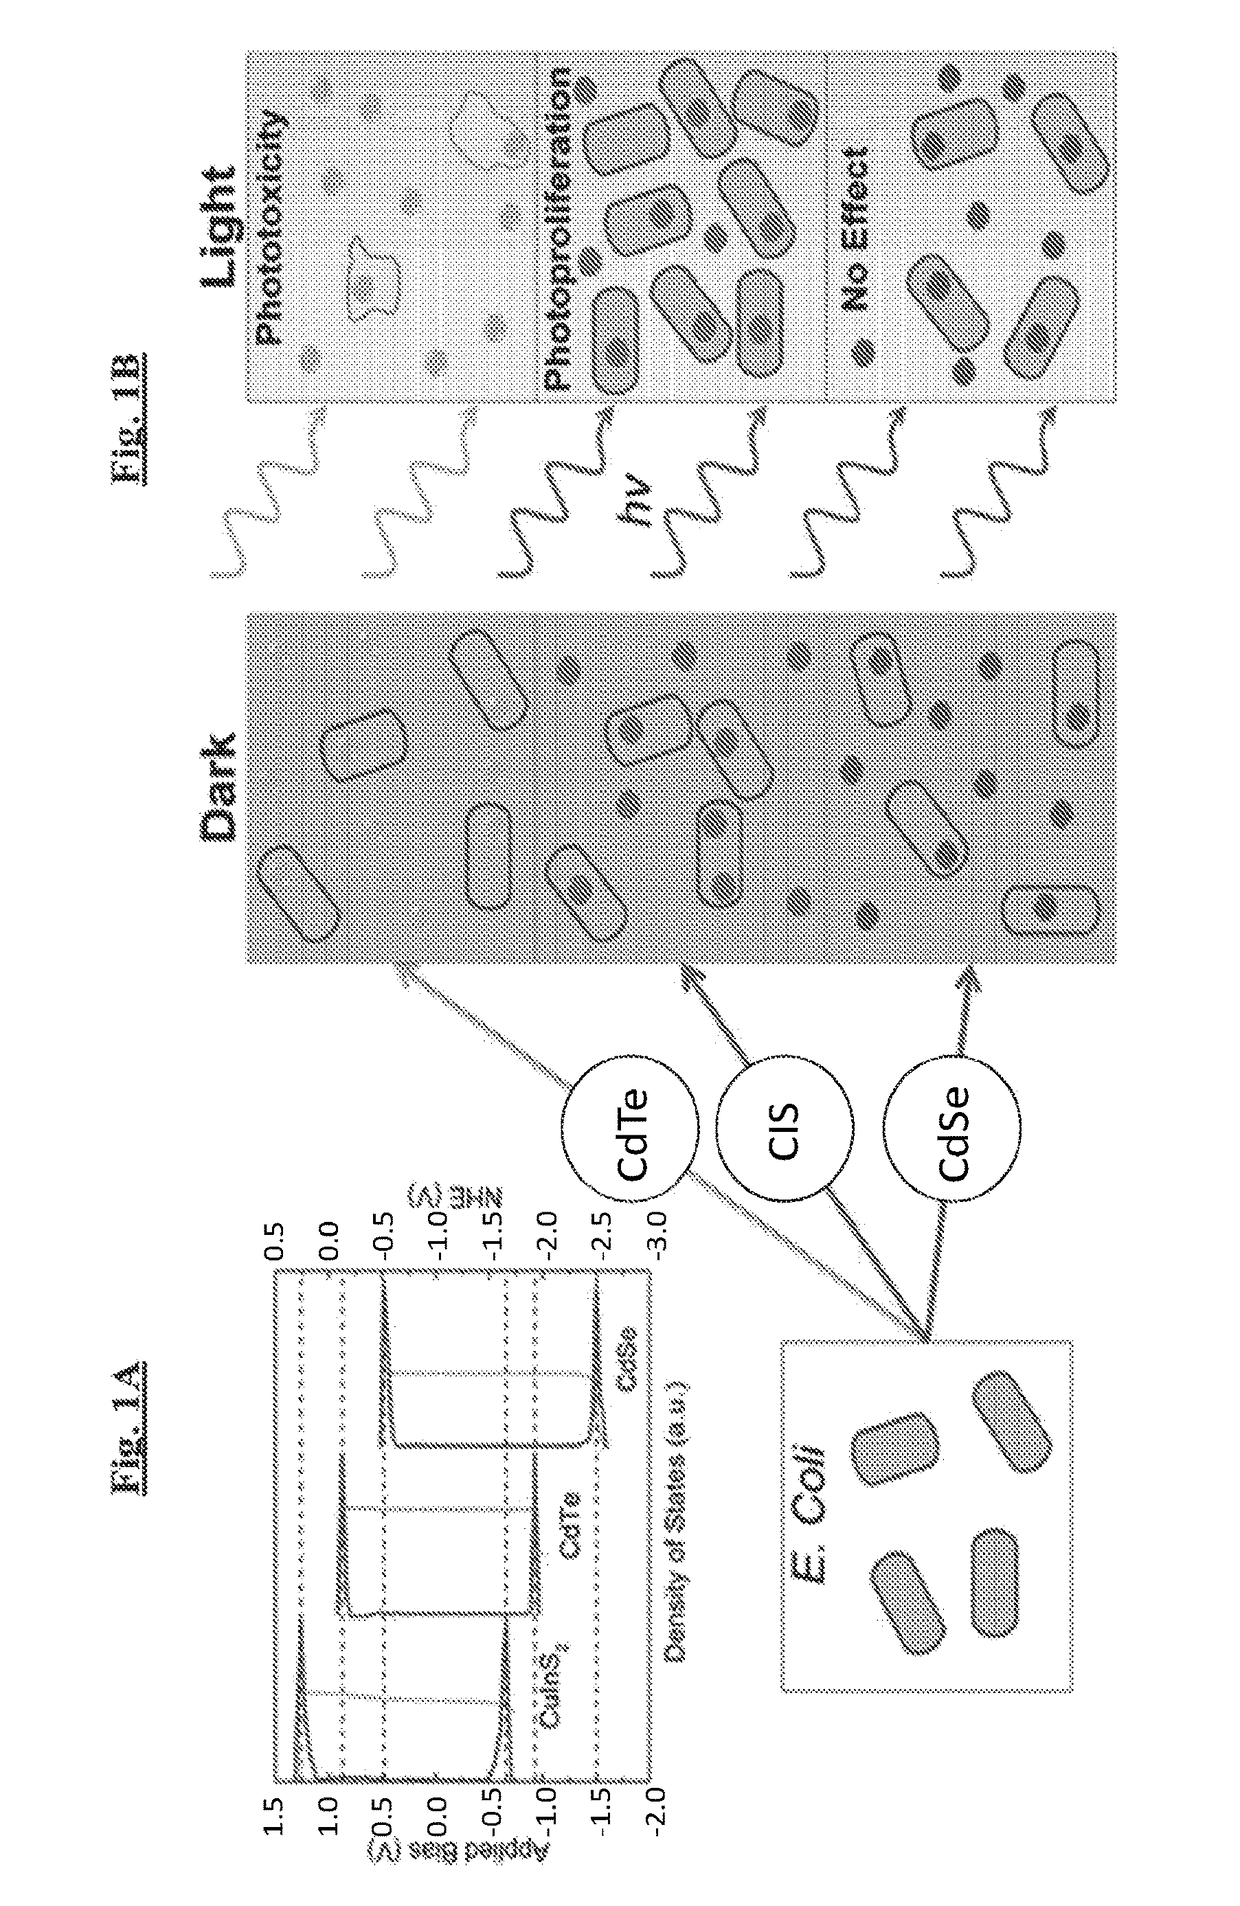 Novel light-activated compositions and methods using the same